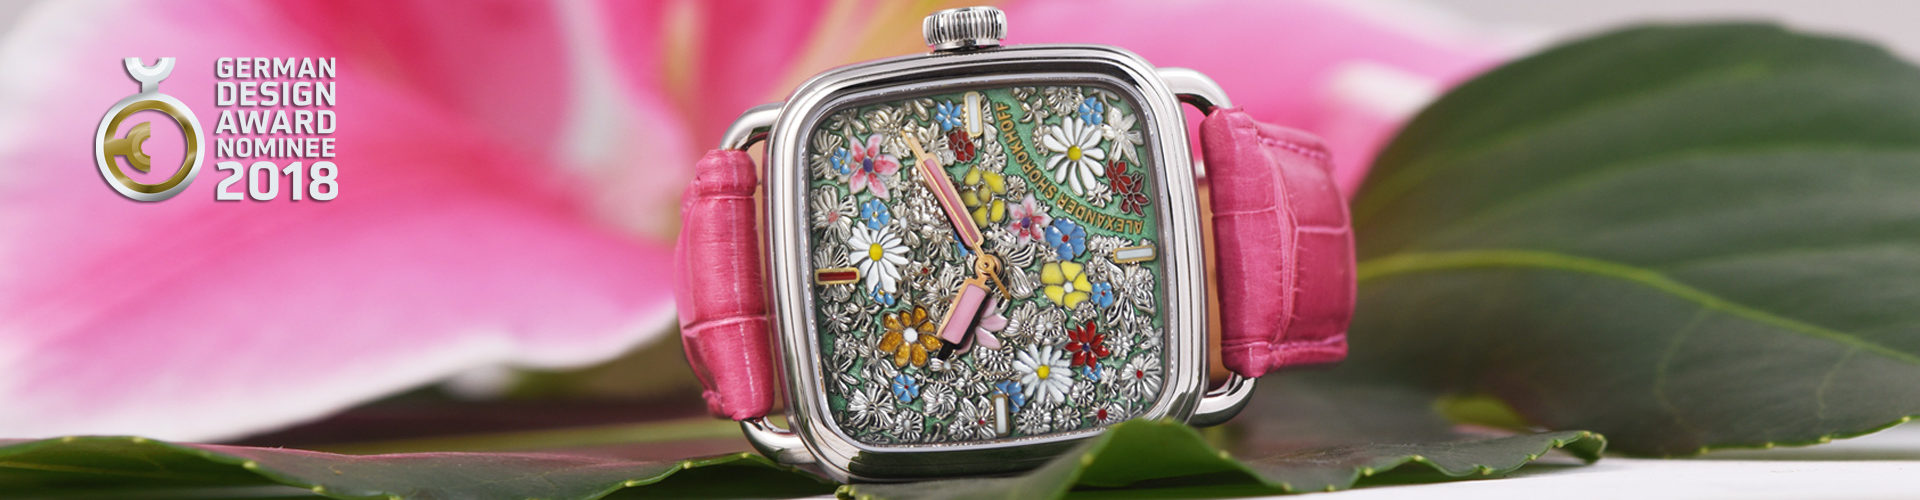 new nomination watch model camomile as luxury watches